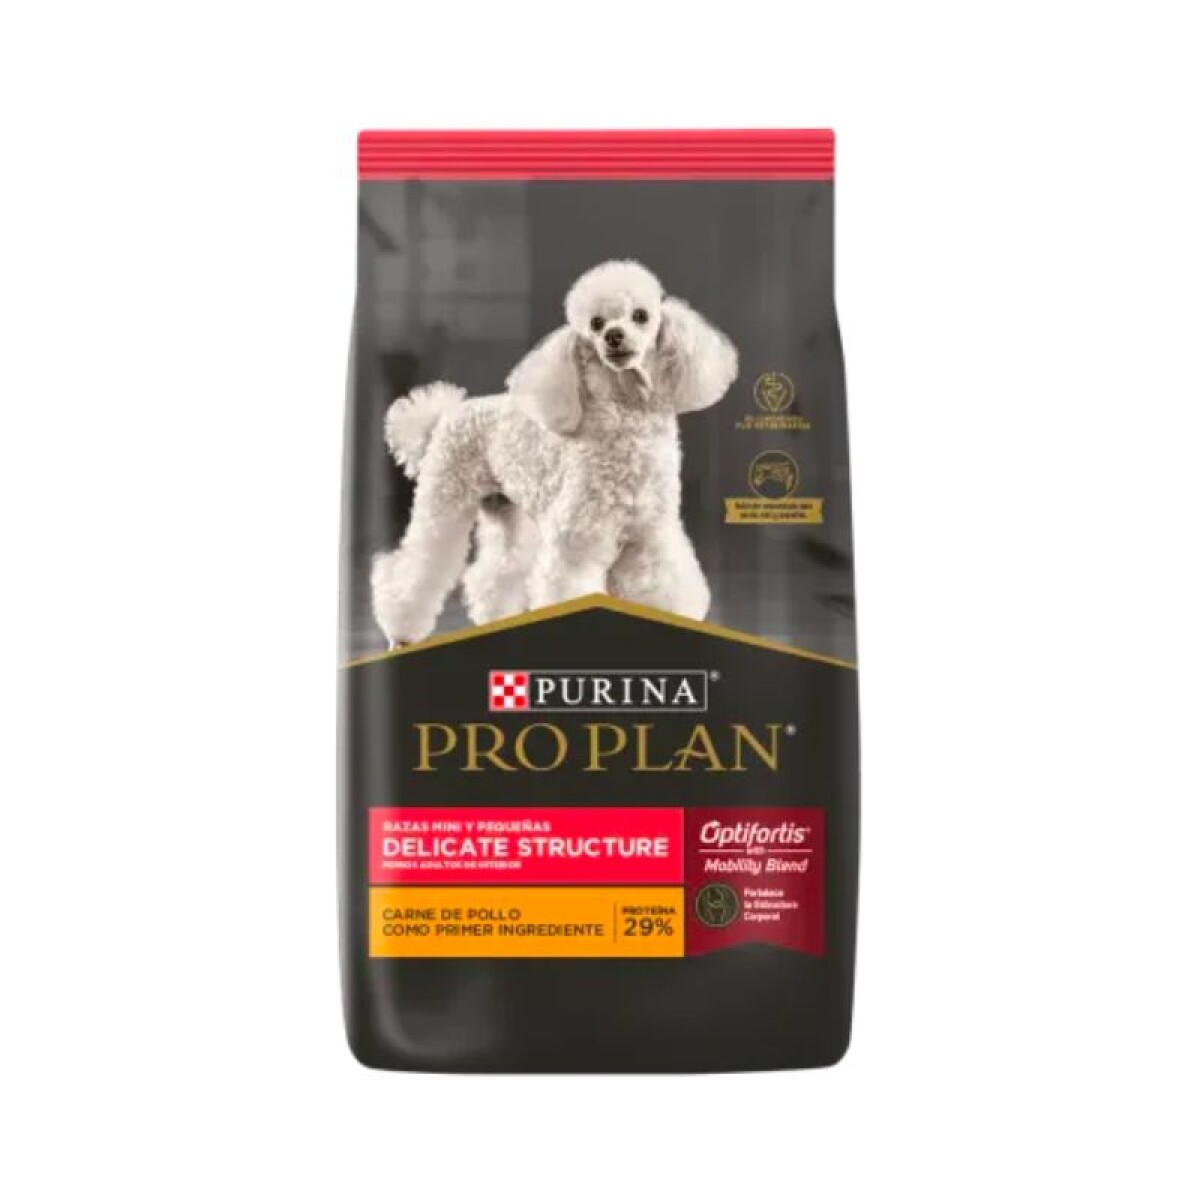 PROPLAN DELICATE STRUCTURE 2 KG - Proplan Delicate Structure 2 Kg 